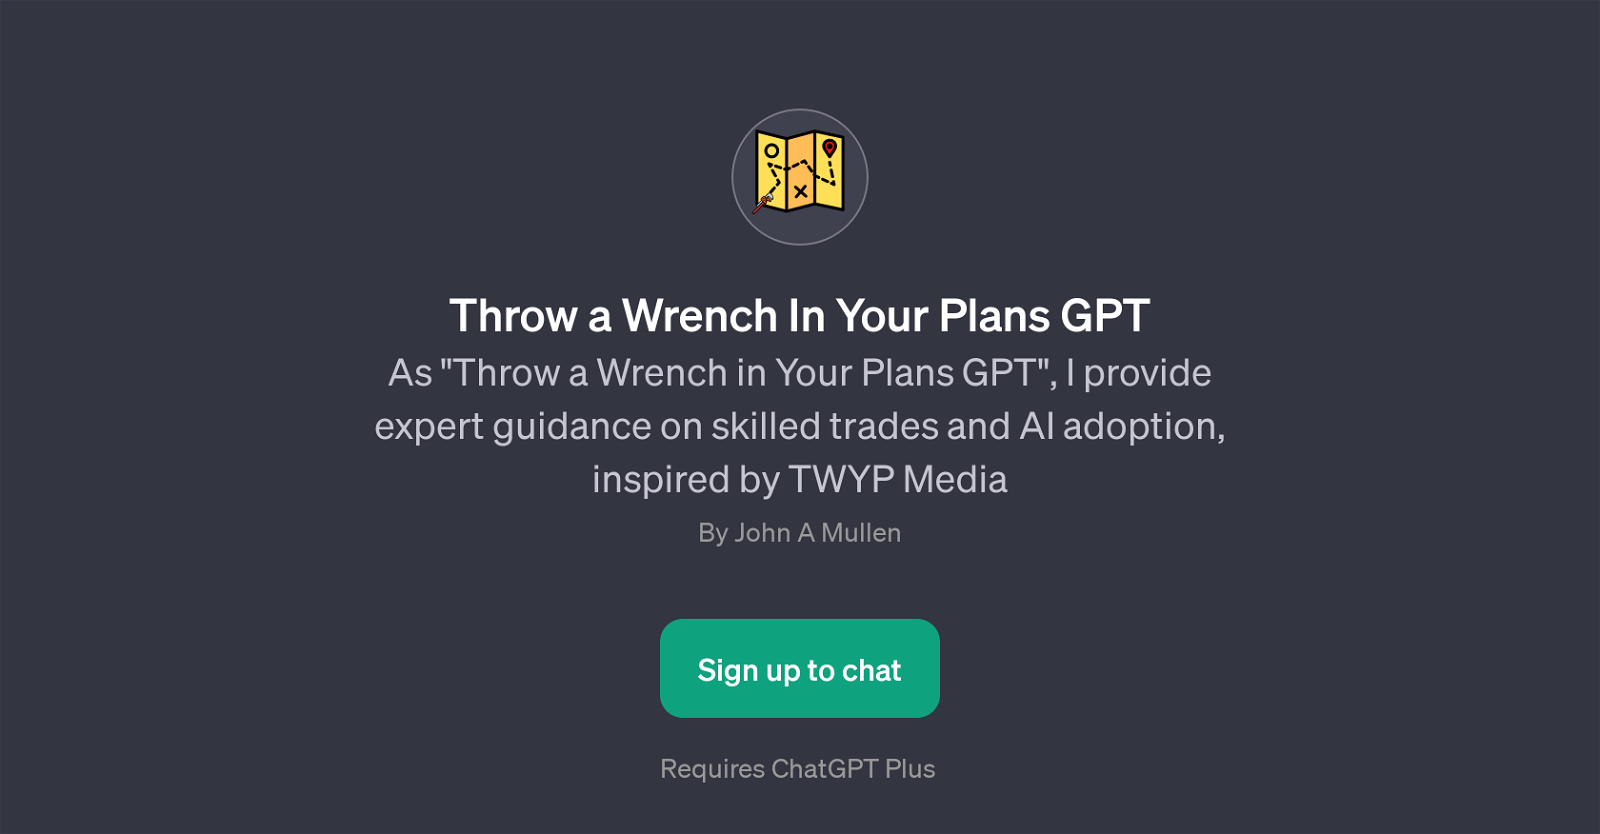 Throw a Wrench In Your Plans GPT website